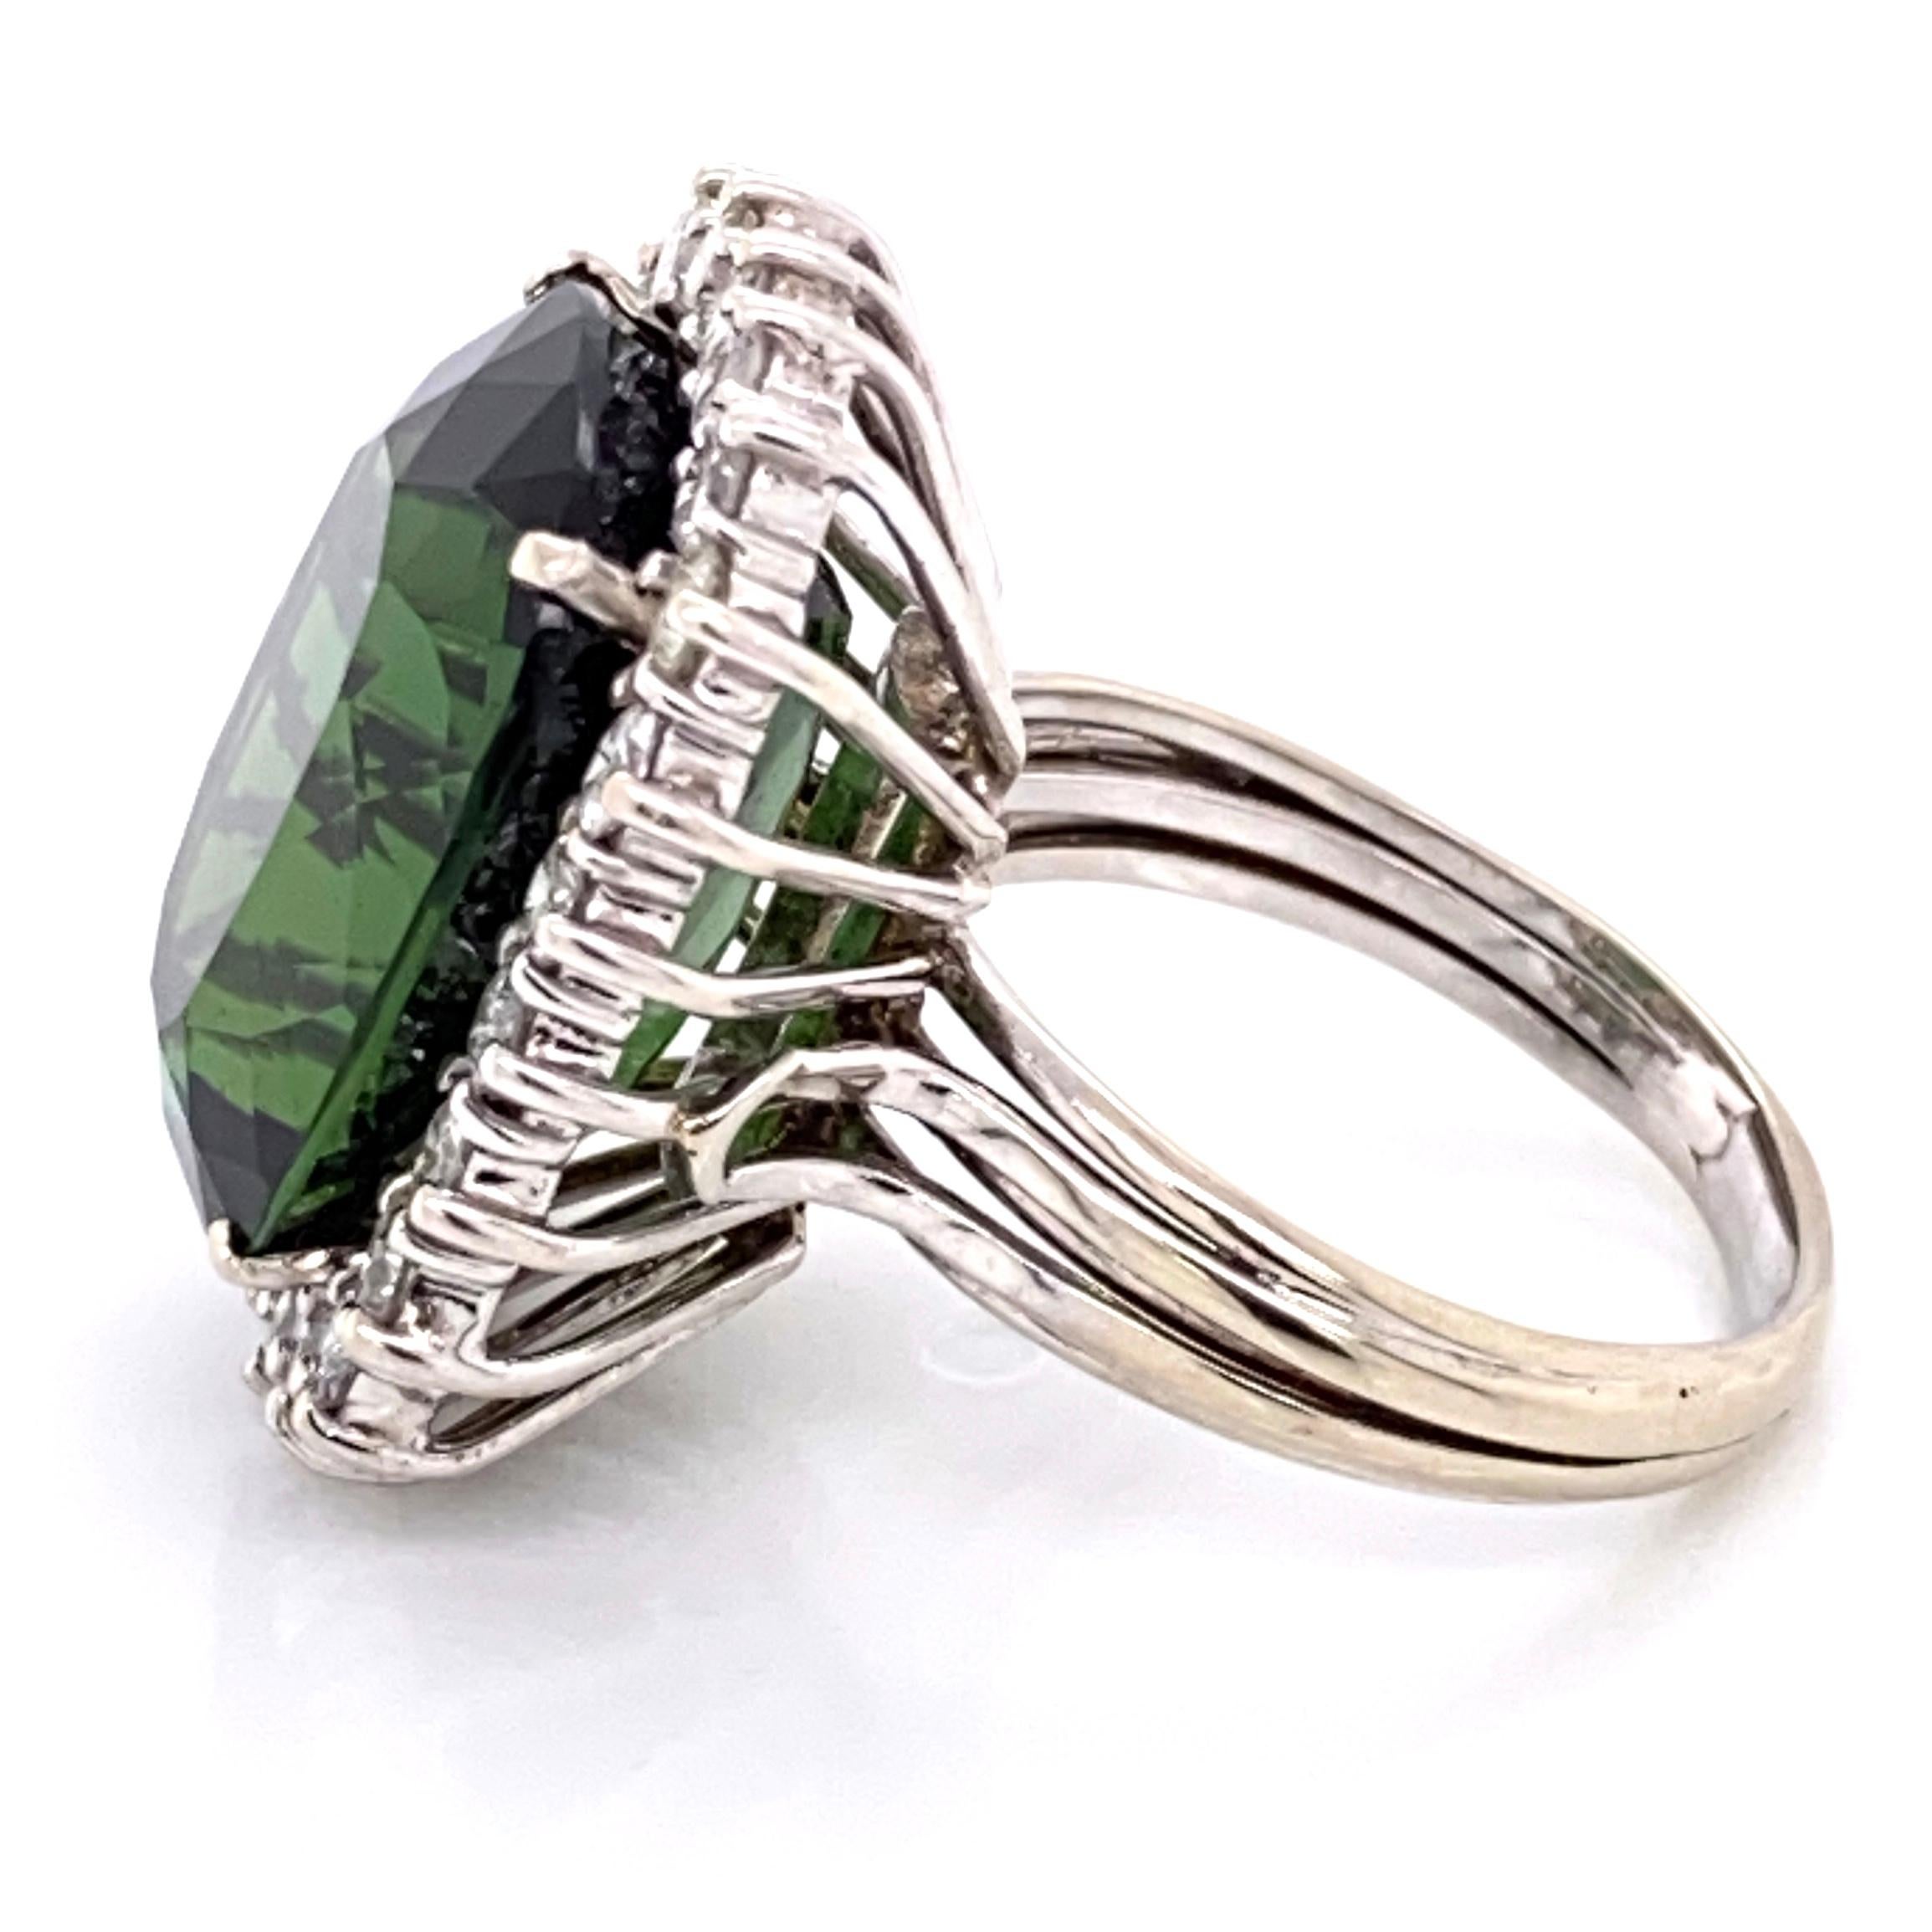 Mixed Cut 18.63 Carat Green Tourmaline Diamond Gold Cocktail Ring Estate Fine Jewelry For Sale